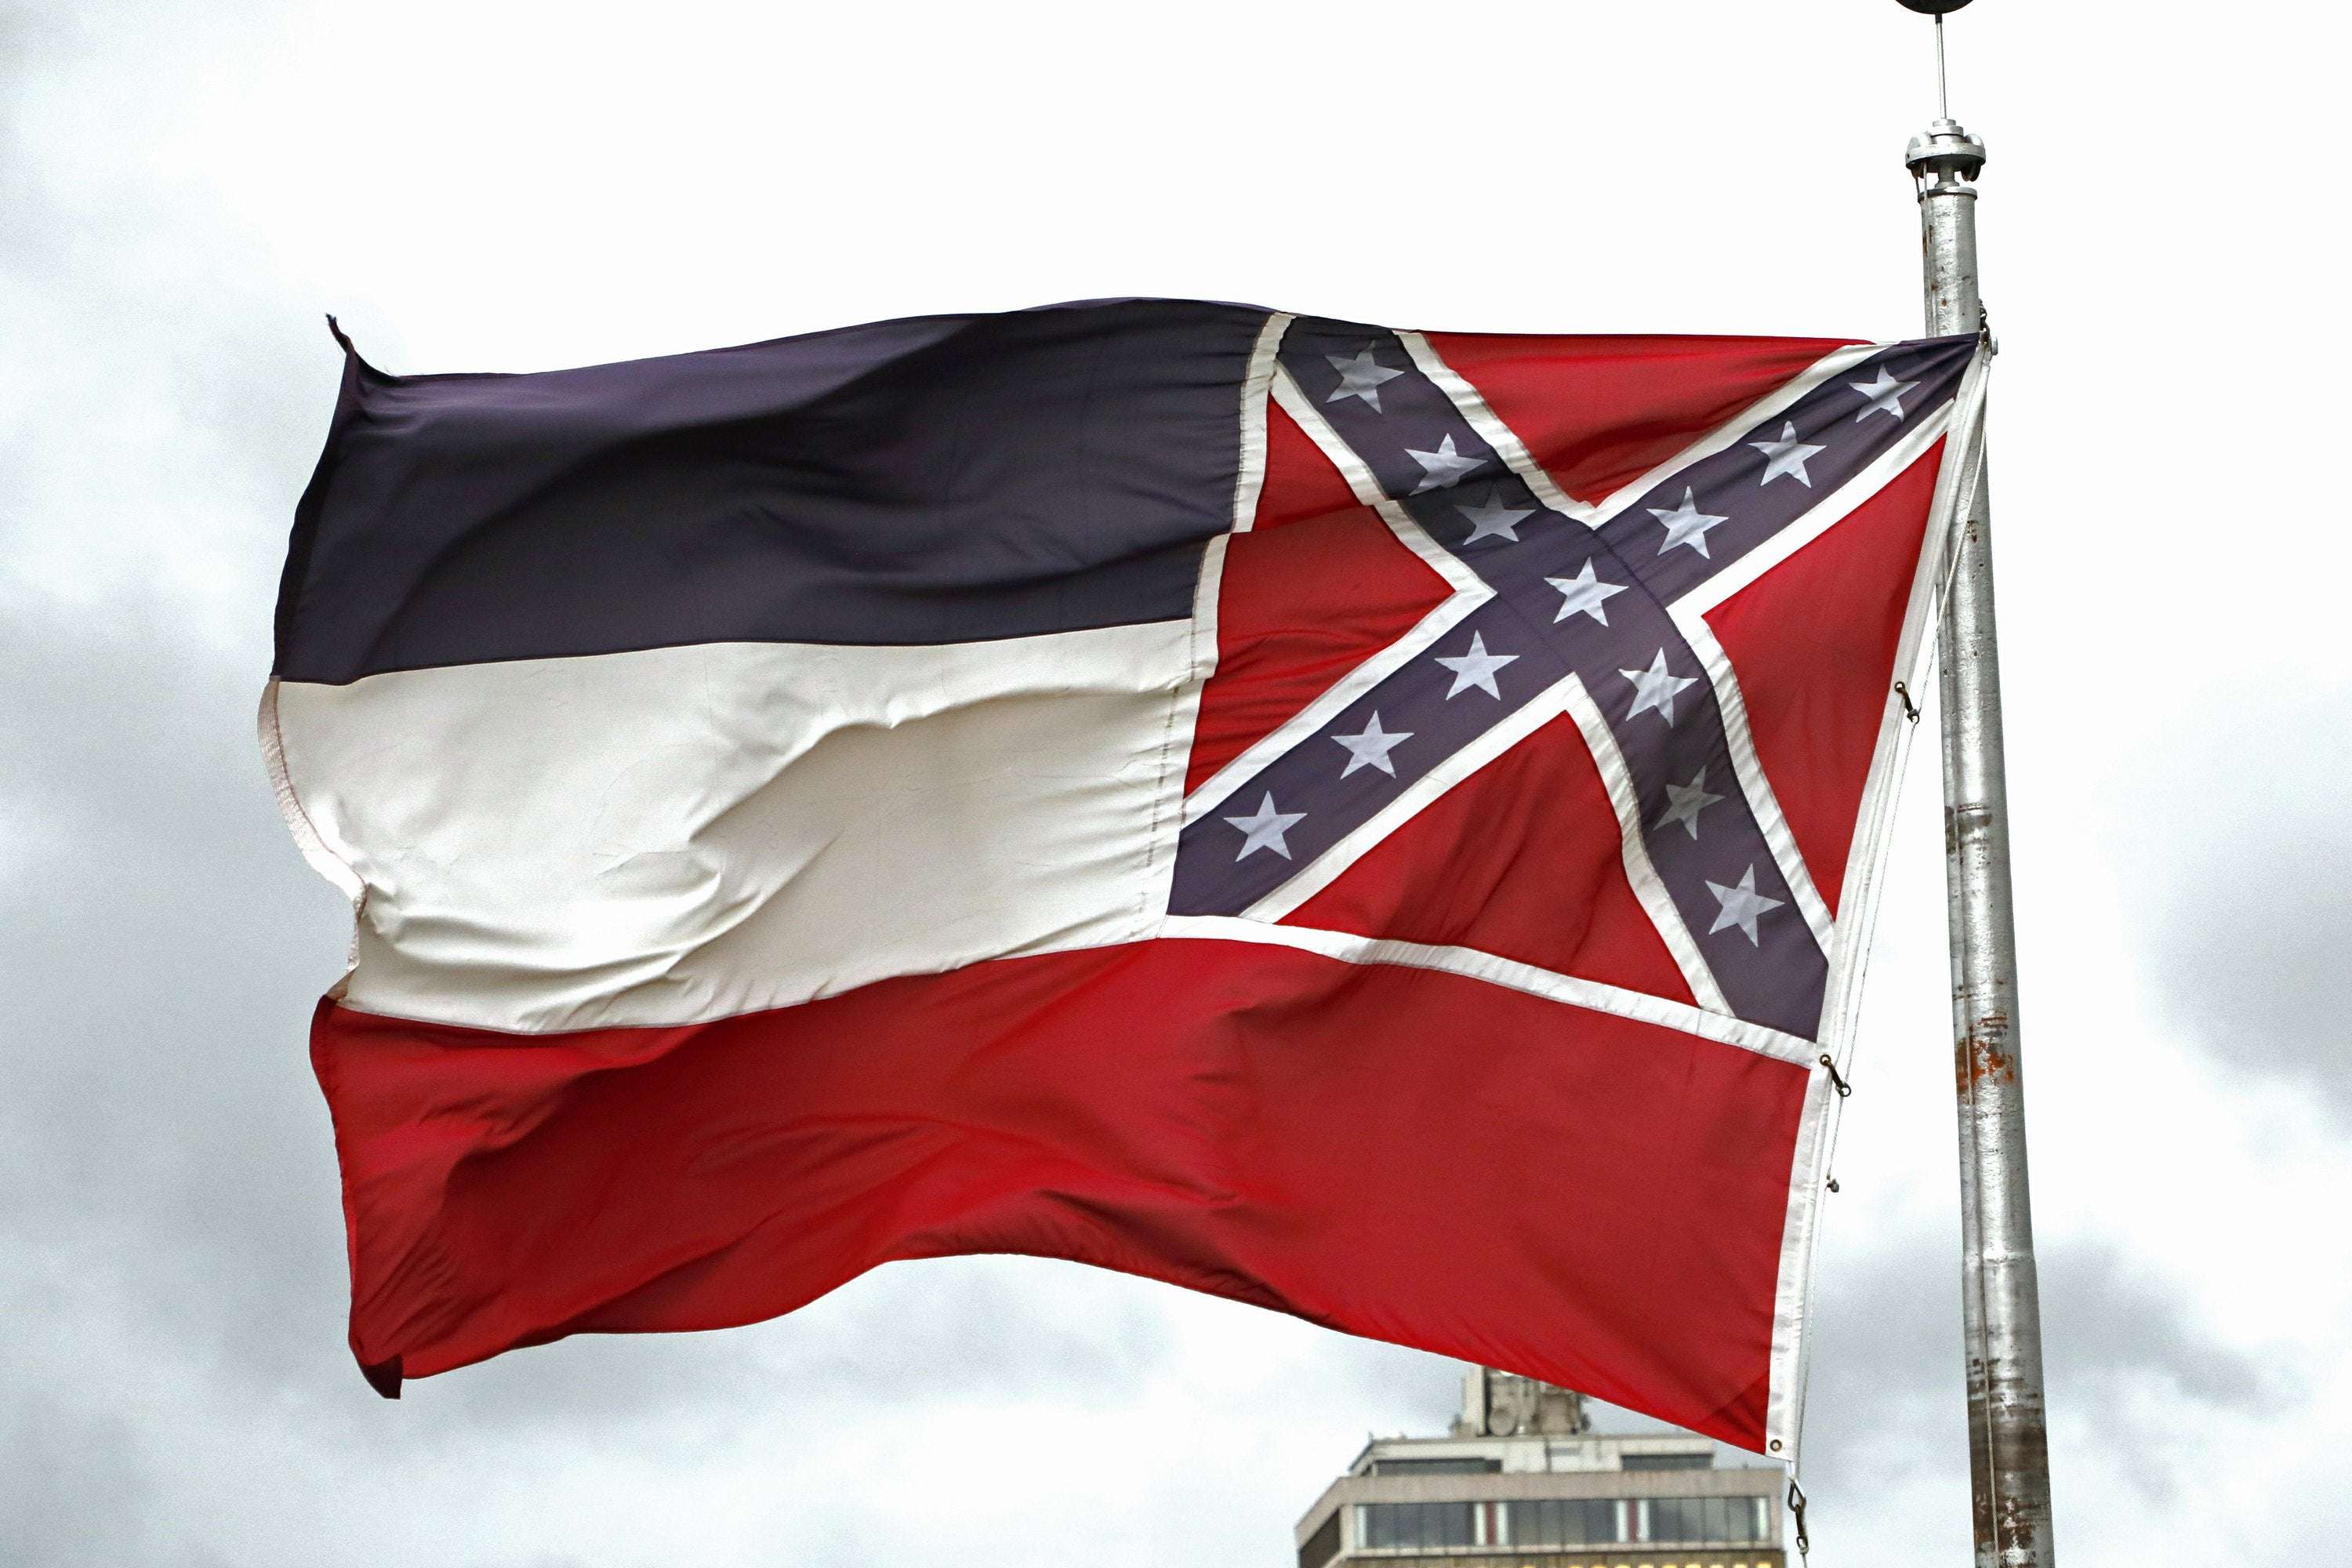 image for Mississippi takes step toward dropping rebel image from flag